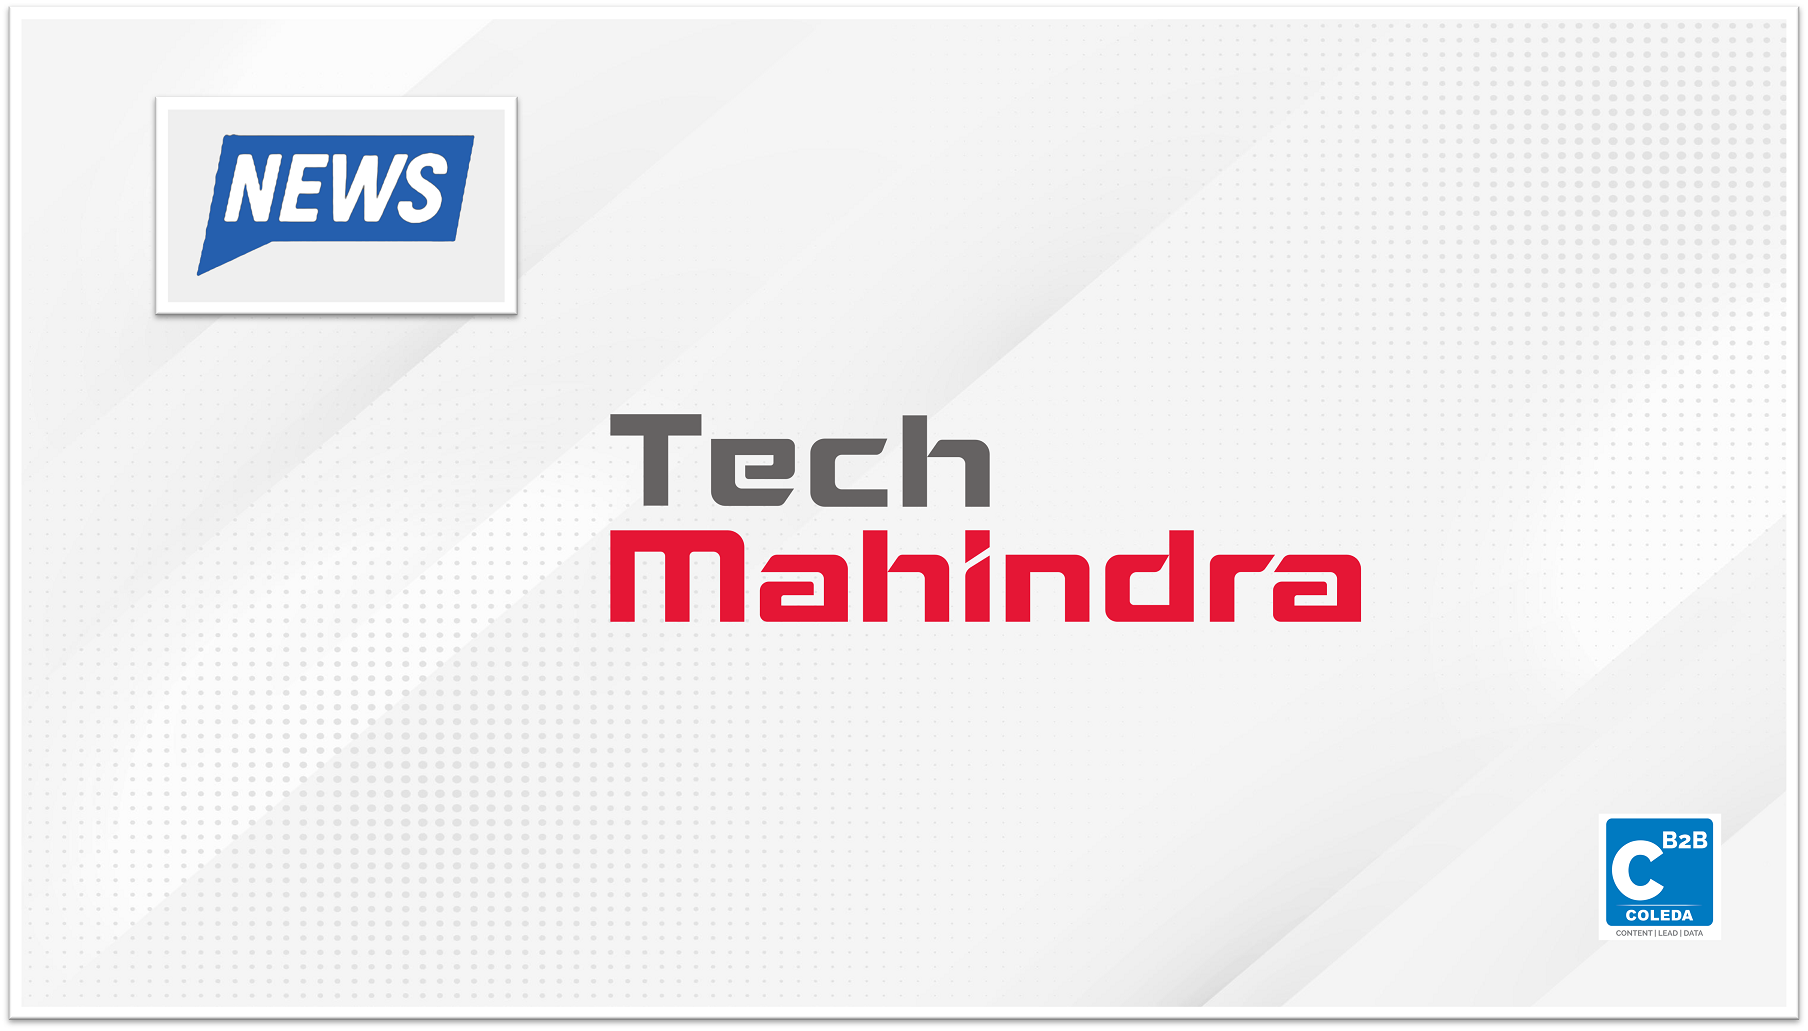 Brand Finance named Tech Mahindra the fastest-growing brand globally in its "Brand Value Rank" ranking